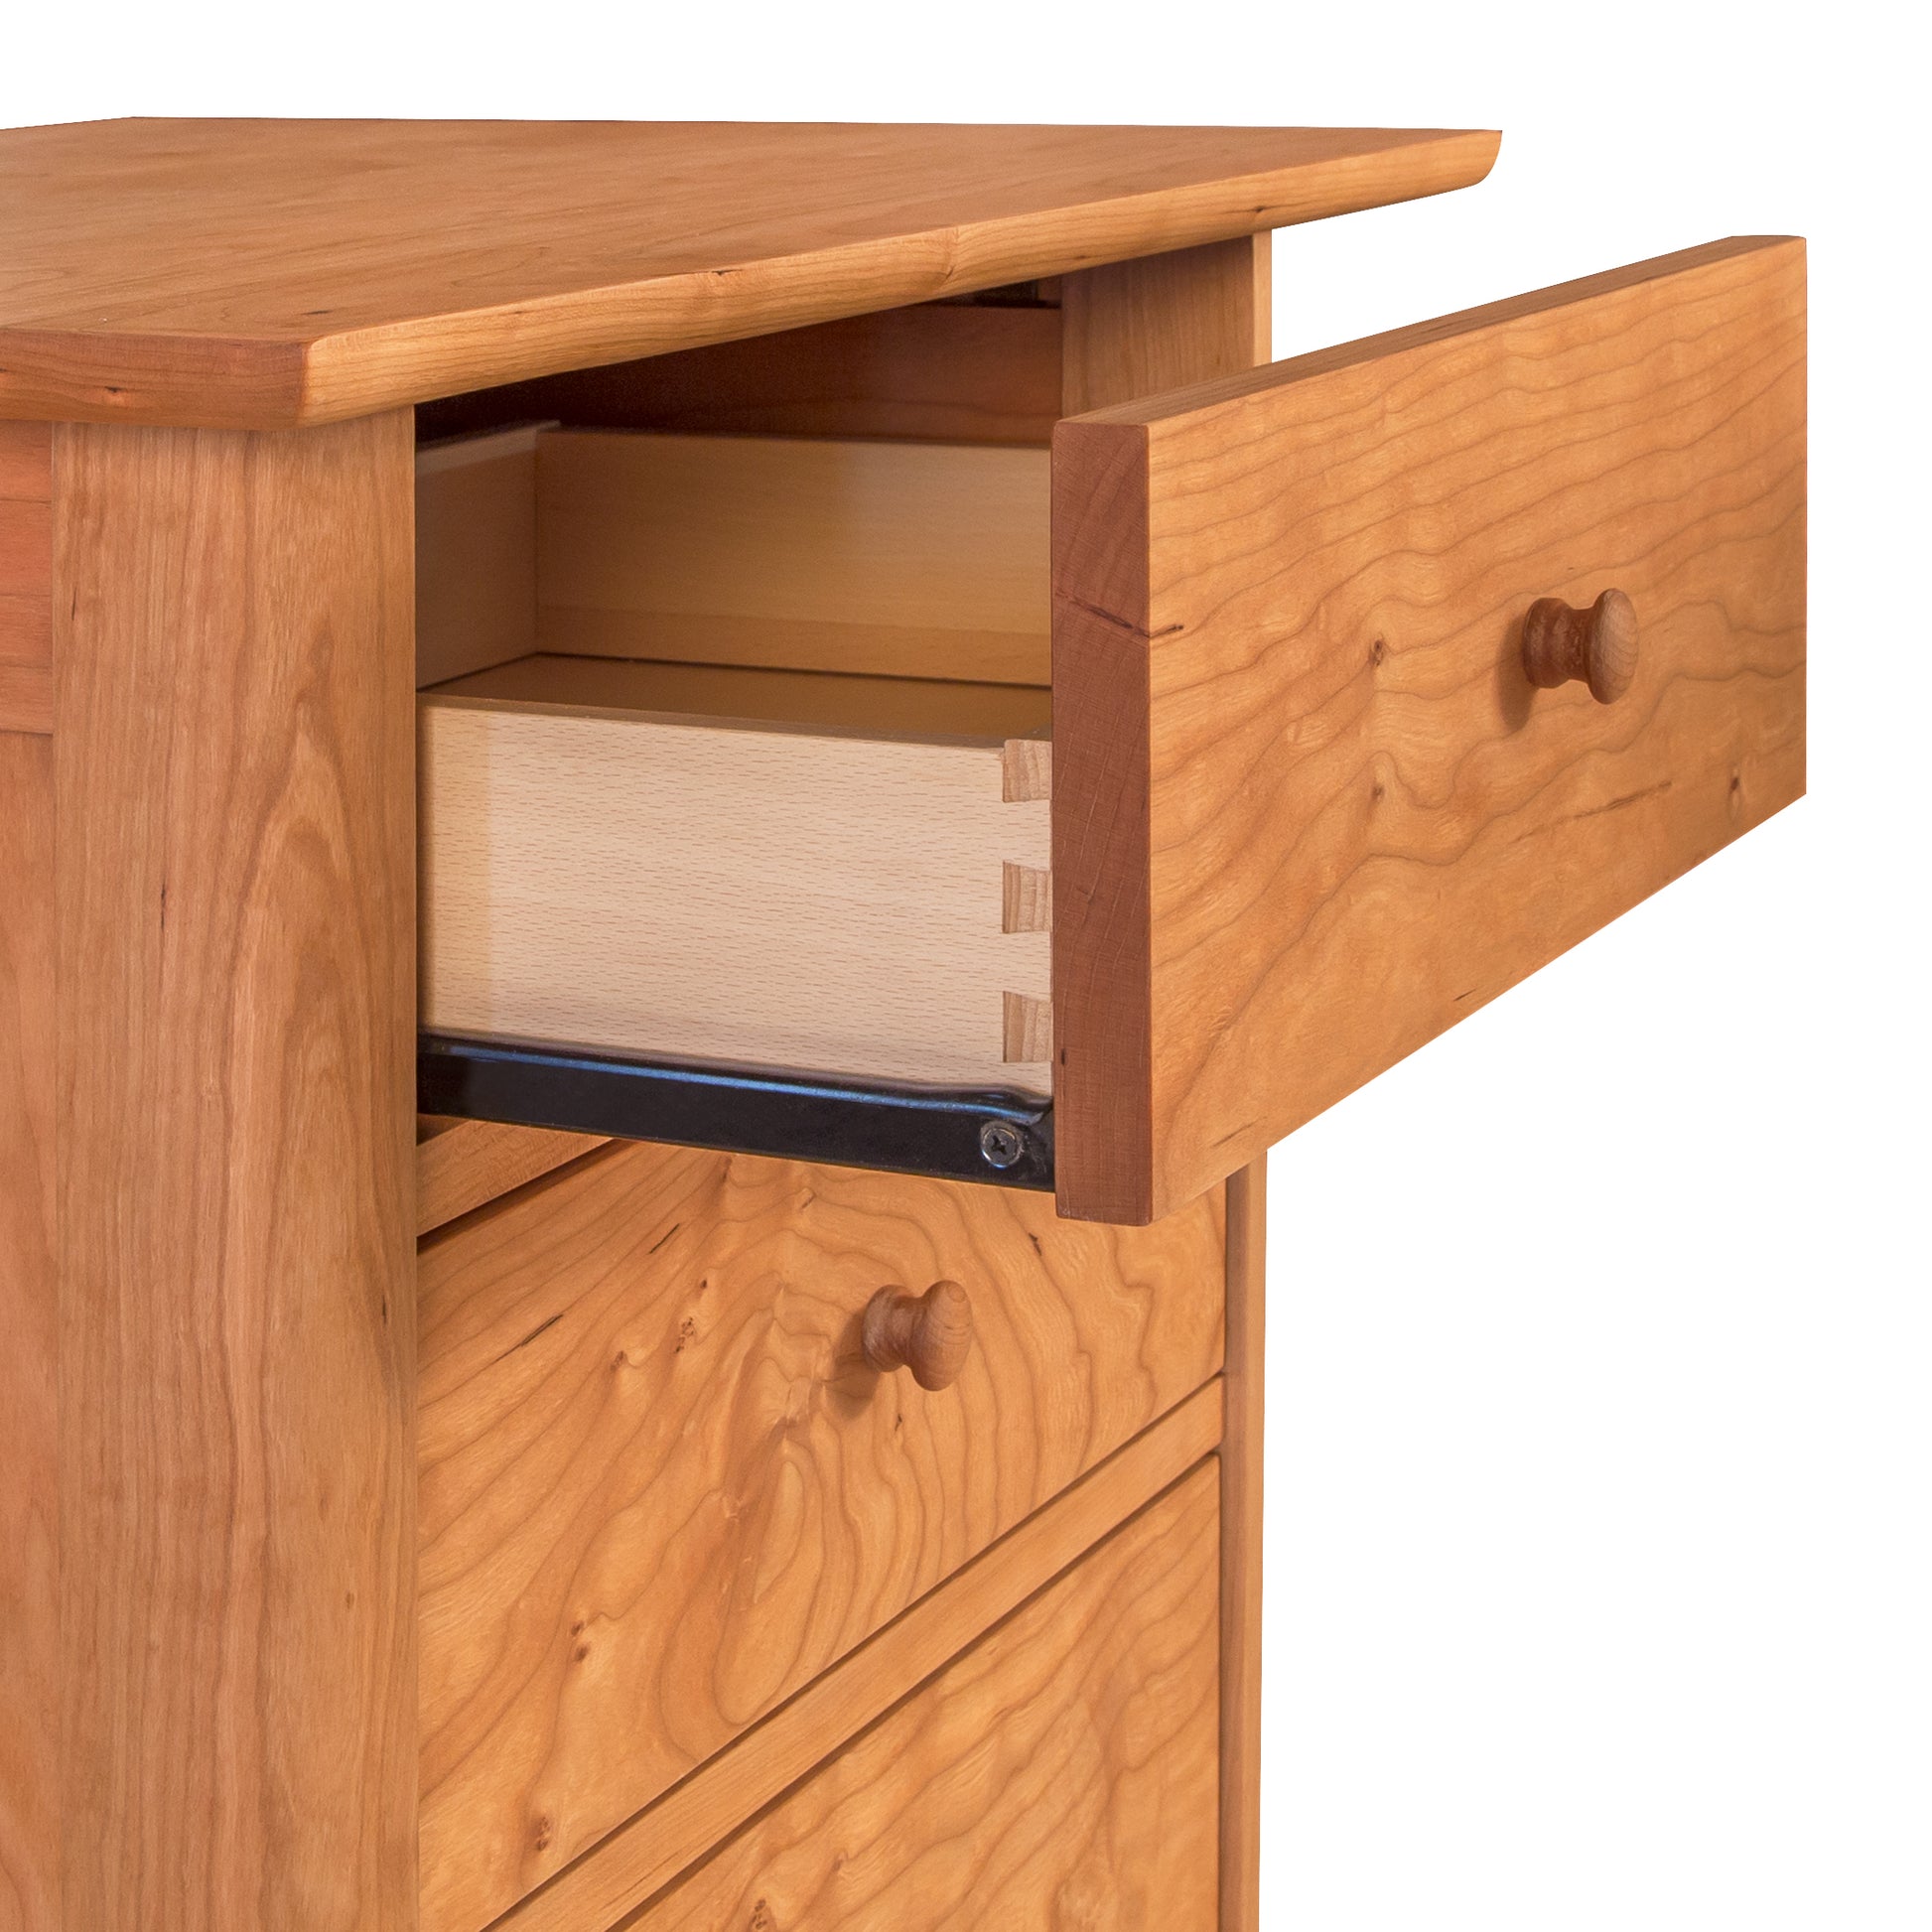 A Heartwood Shaker 3-Drawer Nightstand by Vermont Furniture Designs with a drawer open.